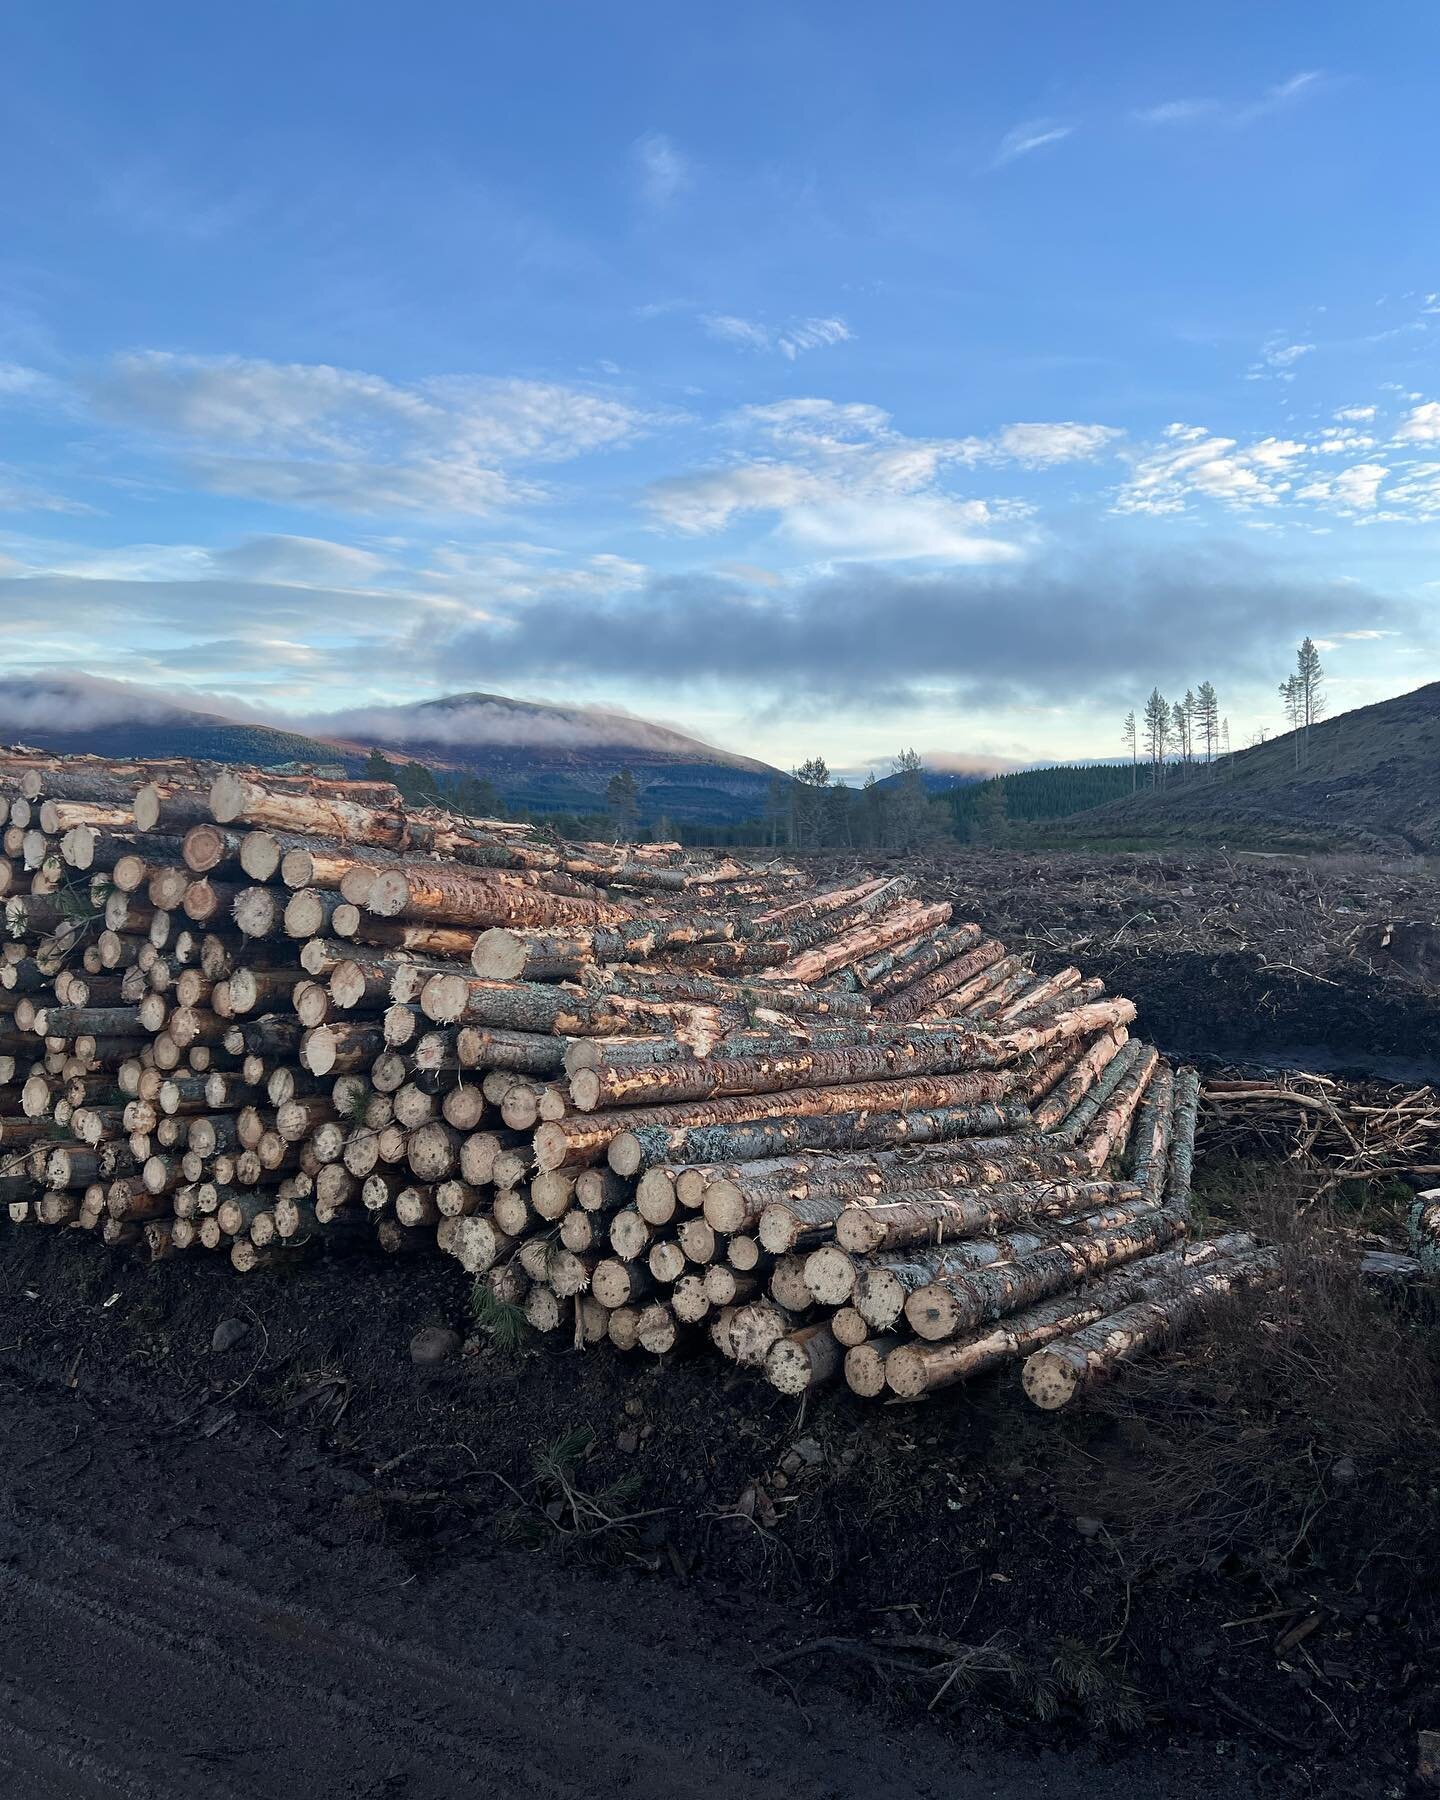 Posts, posts and more posts.  High quality LP fencing from high quality operators. It&rsquo;s important to maximise the value of each crop #timber #forestry #harvesting #felling #MunroHarvesting #woodland #tigercat #johndeere #fencing #sawmill #Scotl